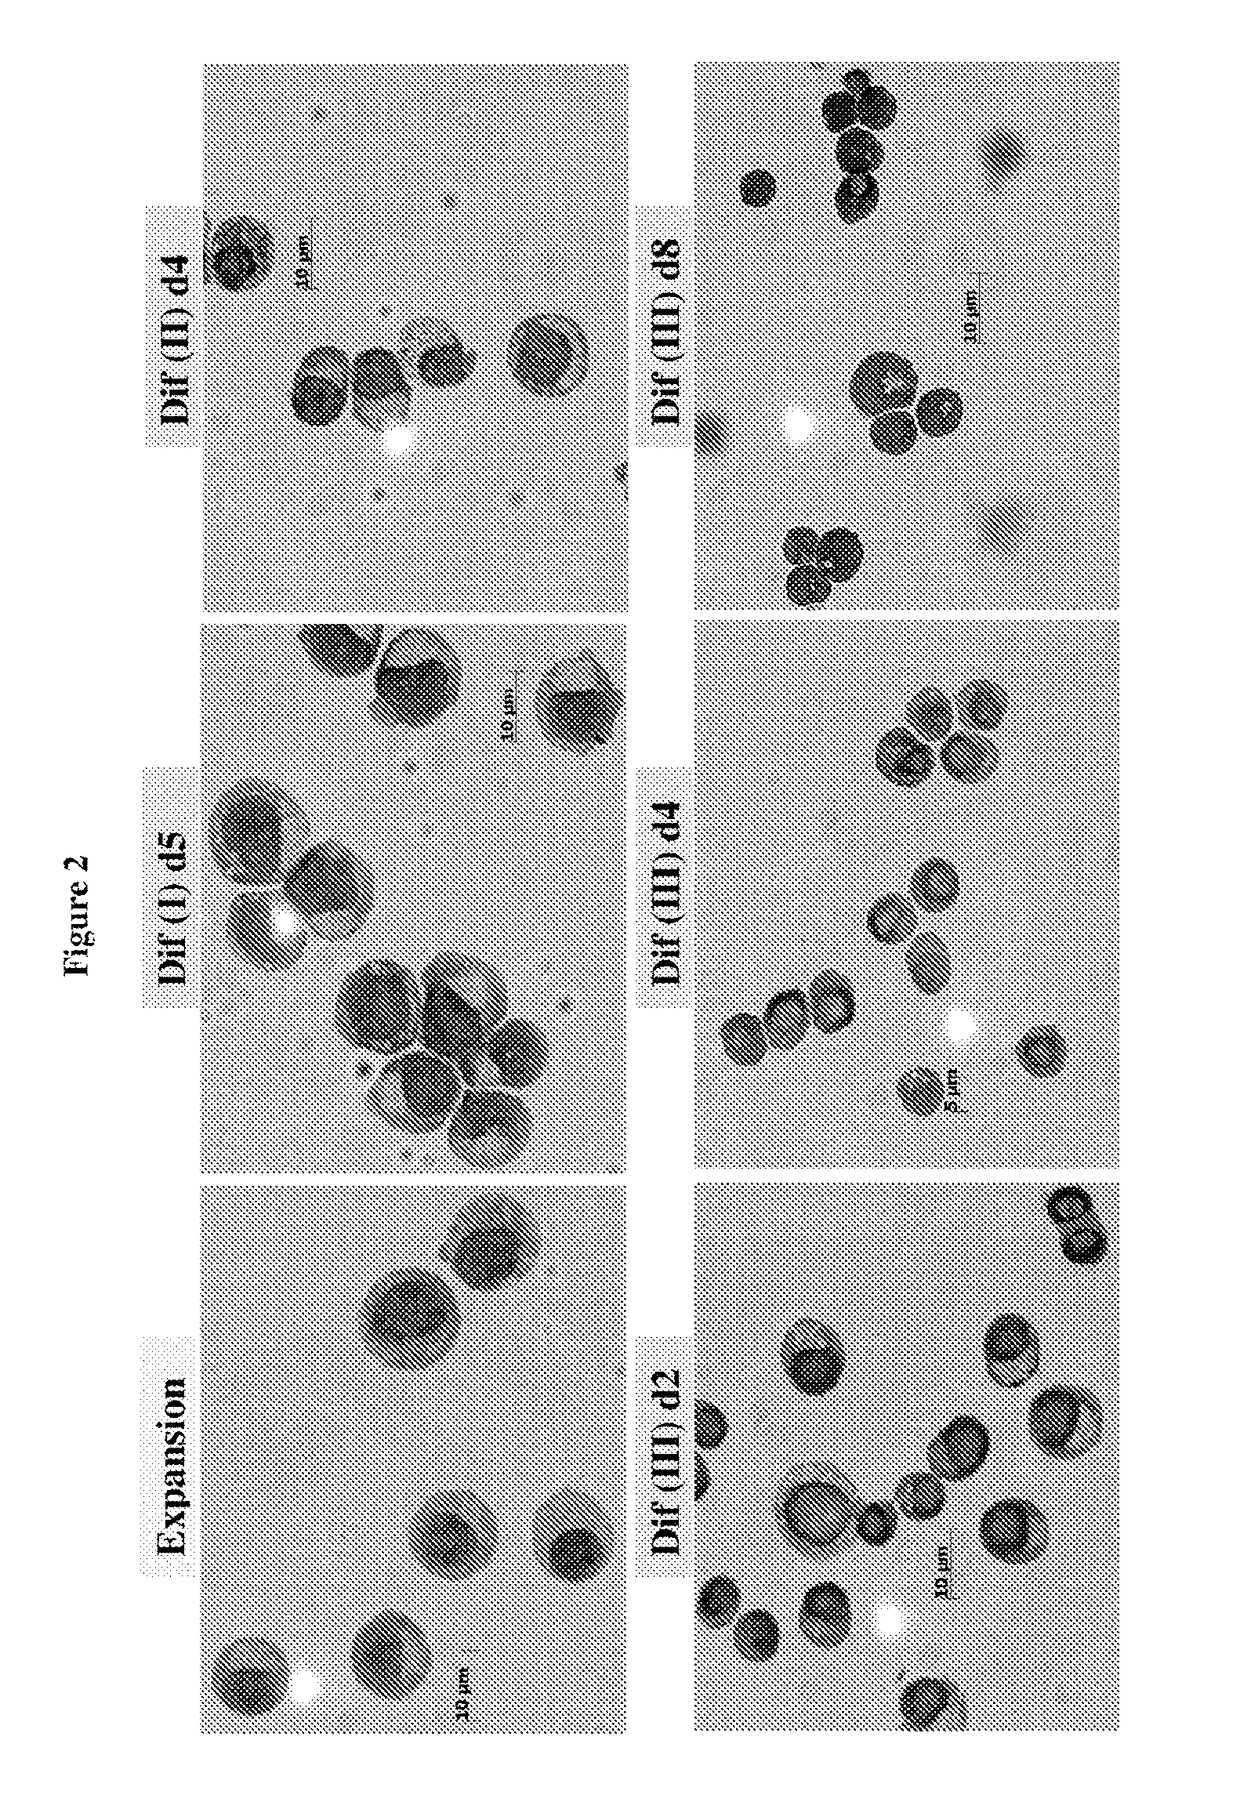 In vitro production of red blood cells with sortaggable proteins